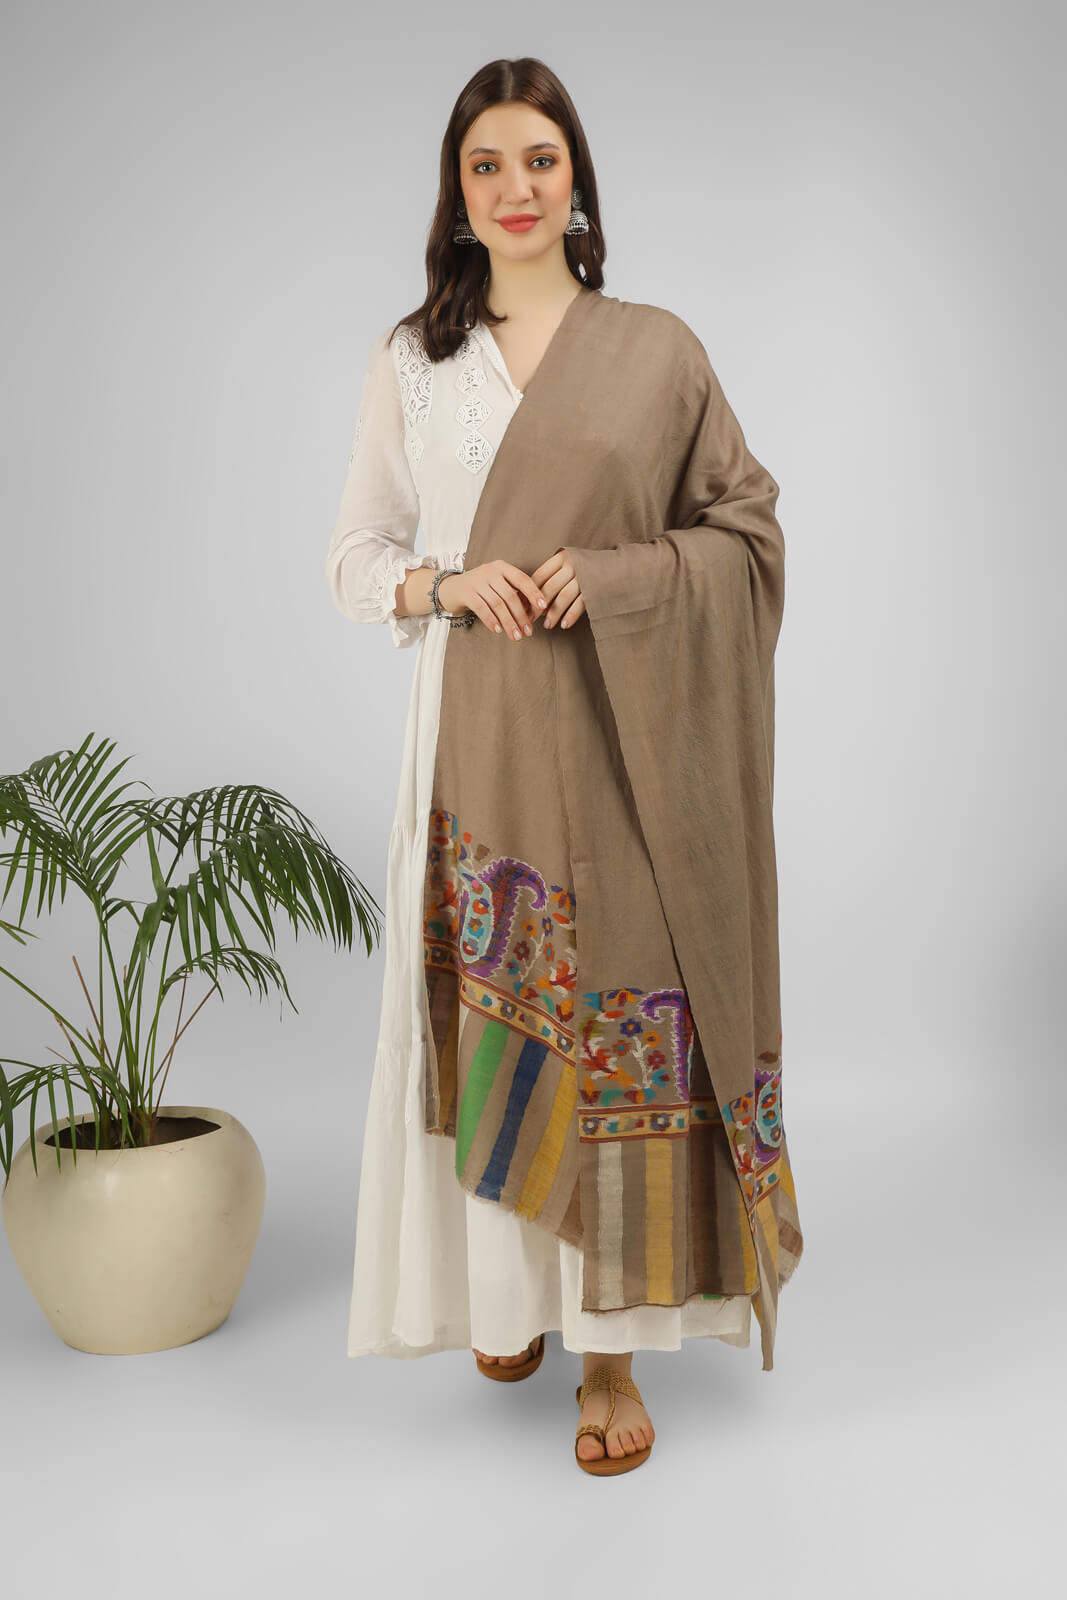 Enjoy the comfort and elegance of this Kashmir-made Natural Paladaar Kani Pashmina Shawl, which was skillfully and expertly constructed with lovely floral and paisley patterns. This elegant and warm shawl will keep you warm and comfortable while making a statement. Additionally, it may be worn with any outfit because to its distinctive and reversible design. Save this priceless item in your closet forever.